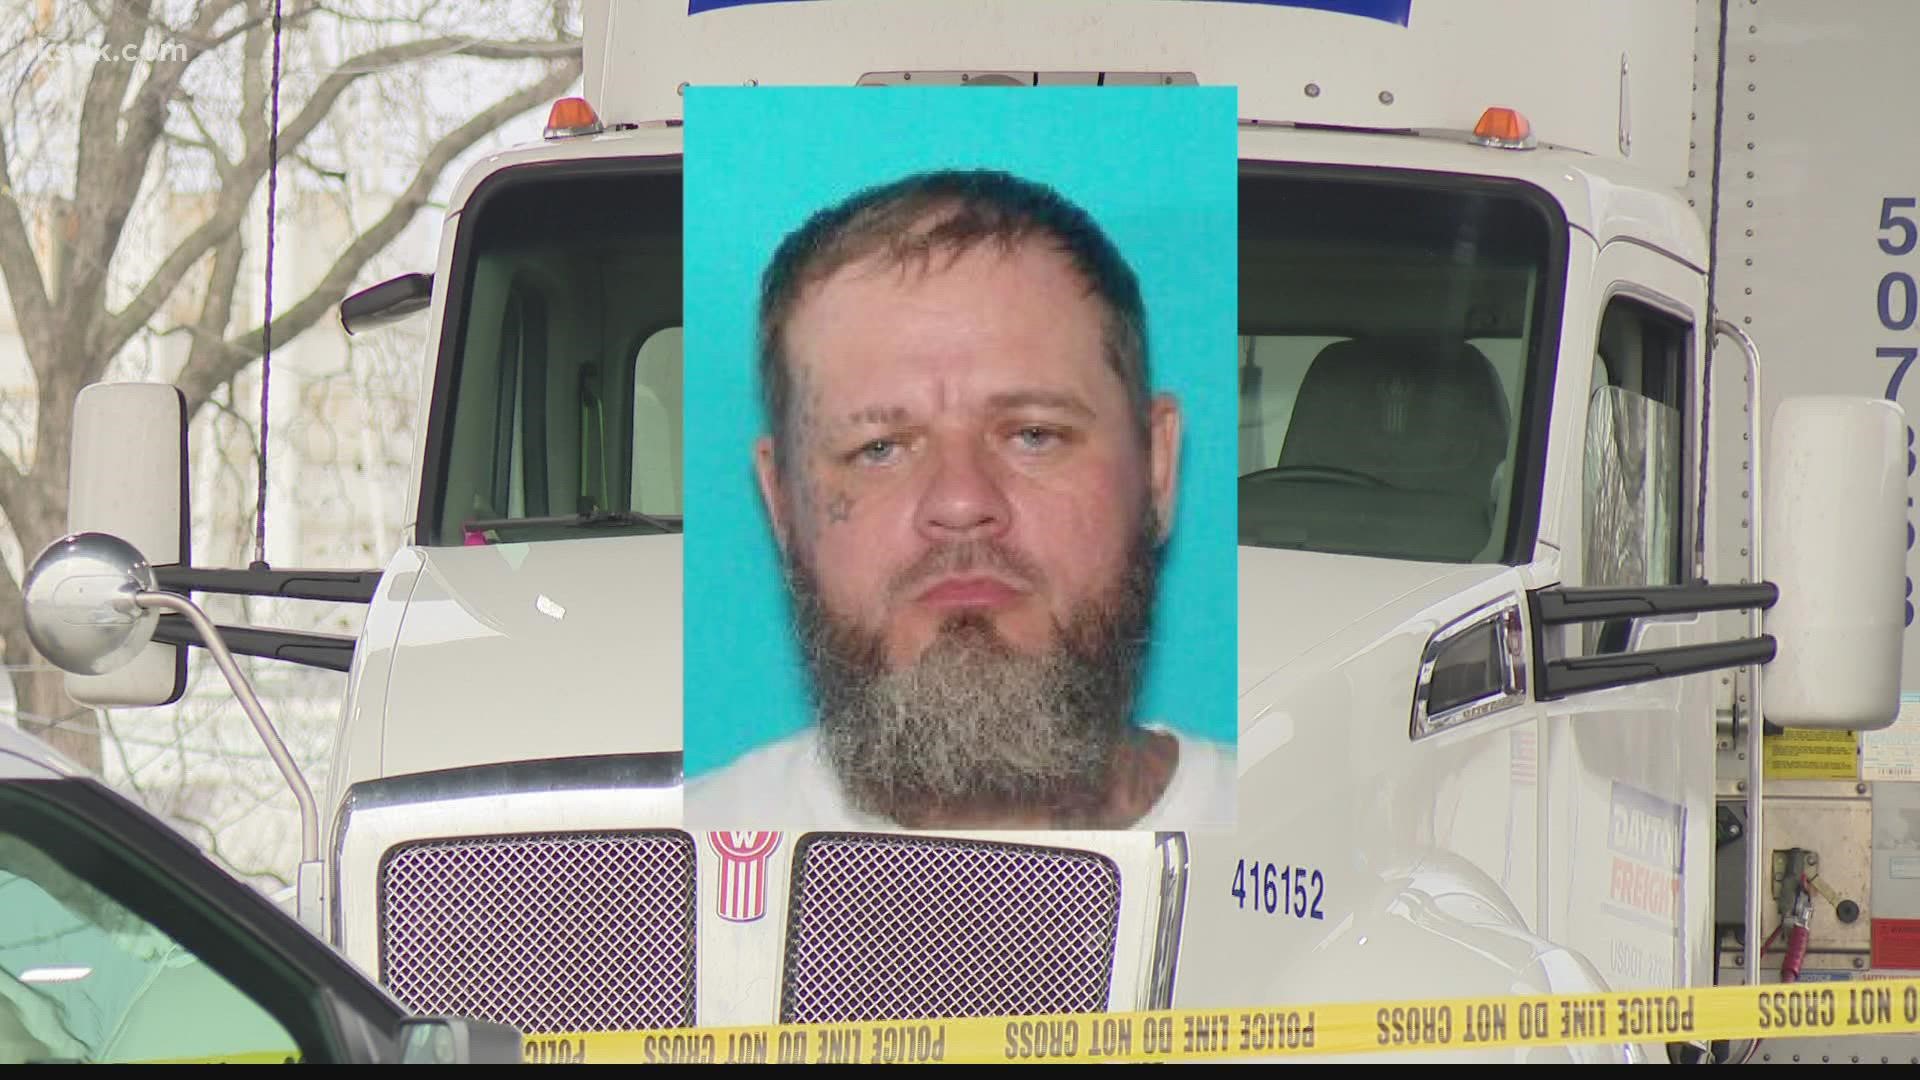 The suspect, 40-year-old Ray Tate, was taken into custody Wednesday afternoon in Clinton County, Illinois.